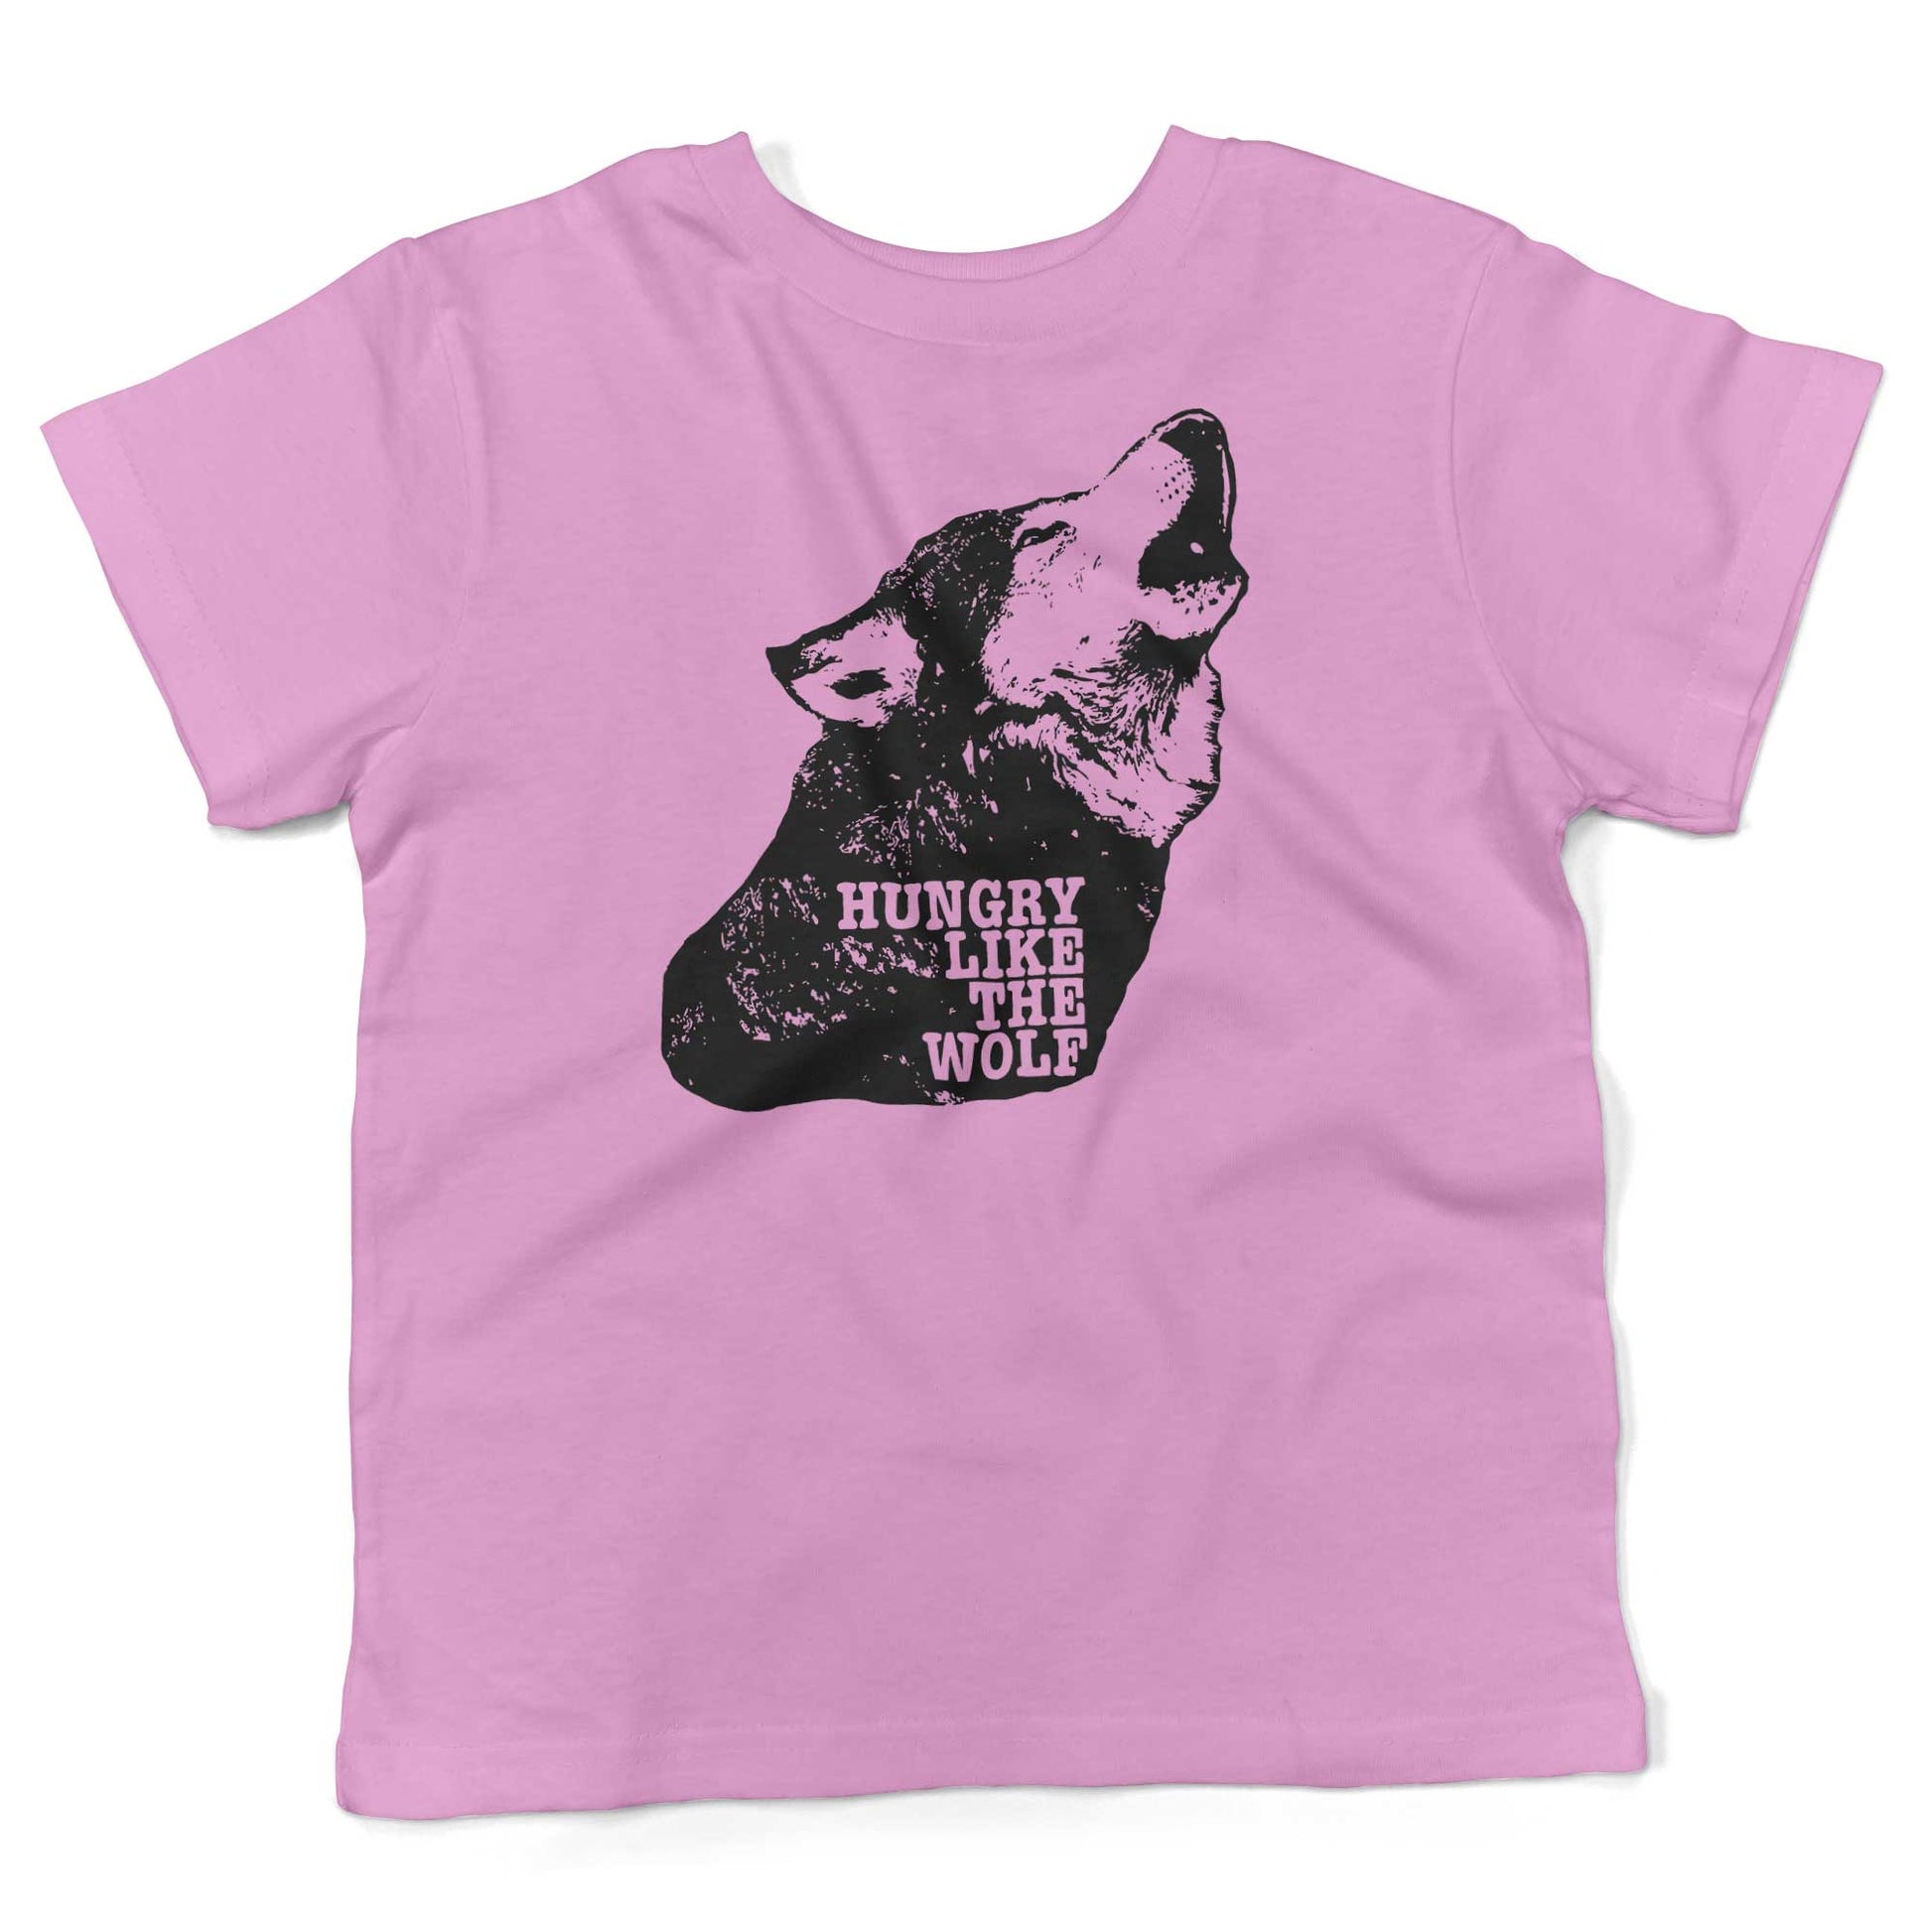 Hungry Like The Wolf Toddler Shirt-Organic Pink-2T